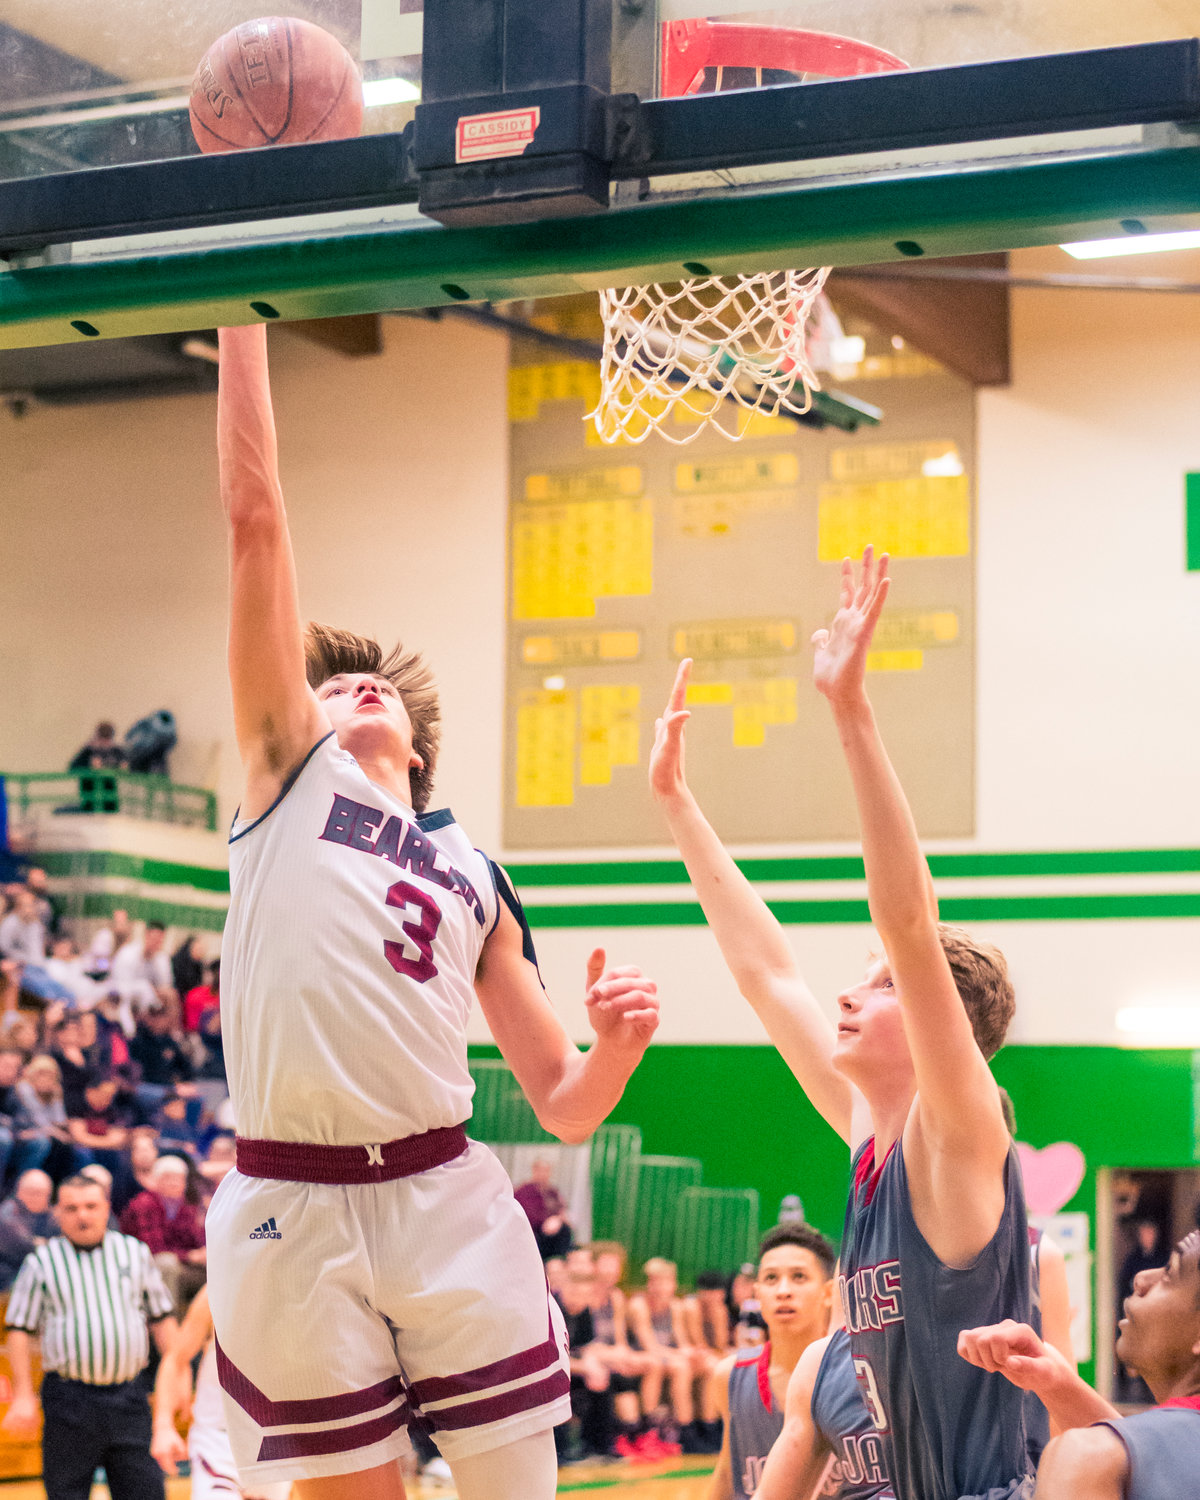 W.F. West's Carter McCoy (3) puts up a shot during a game against Jacks Thursday night at Tumwater High School.